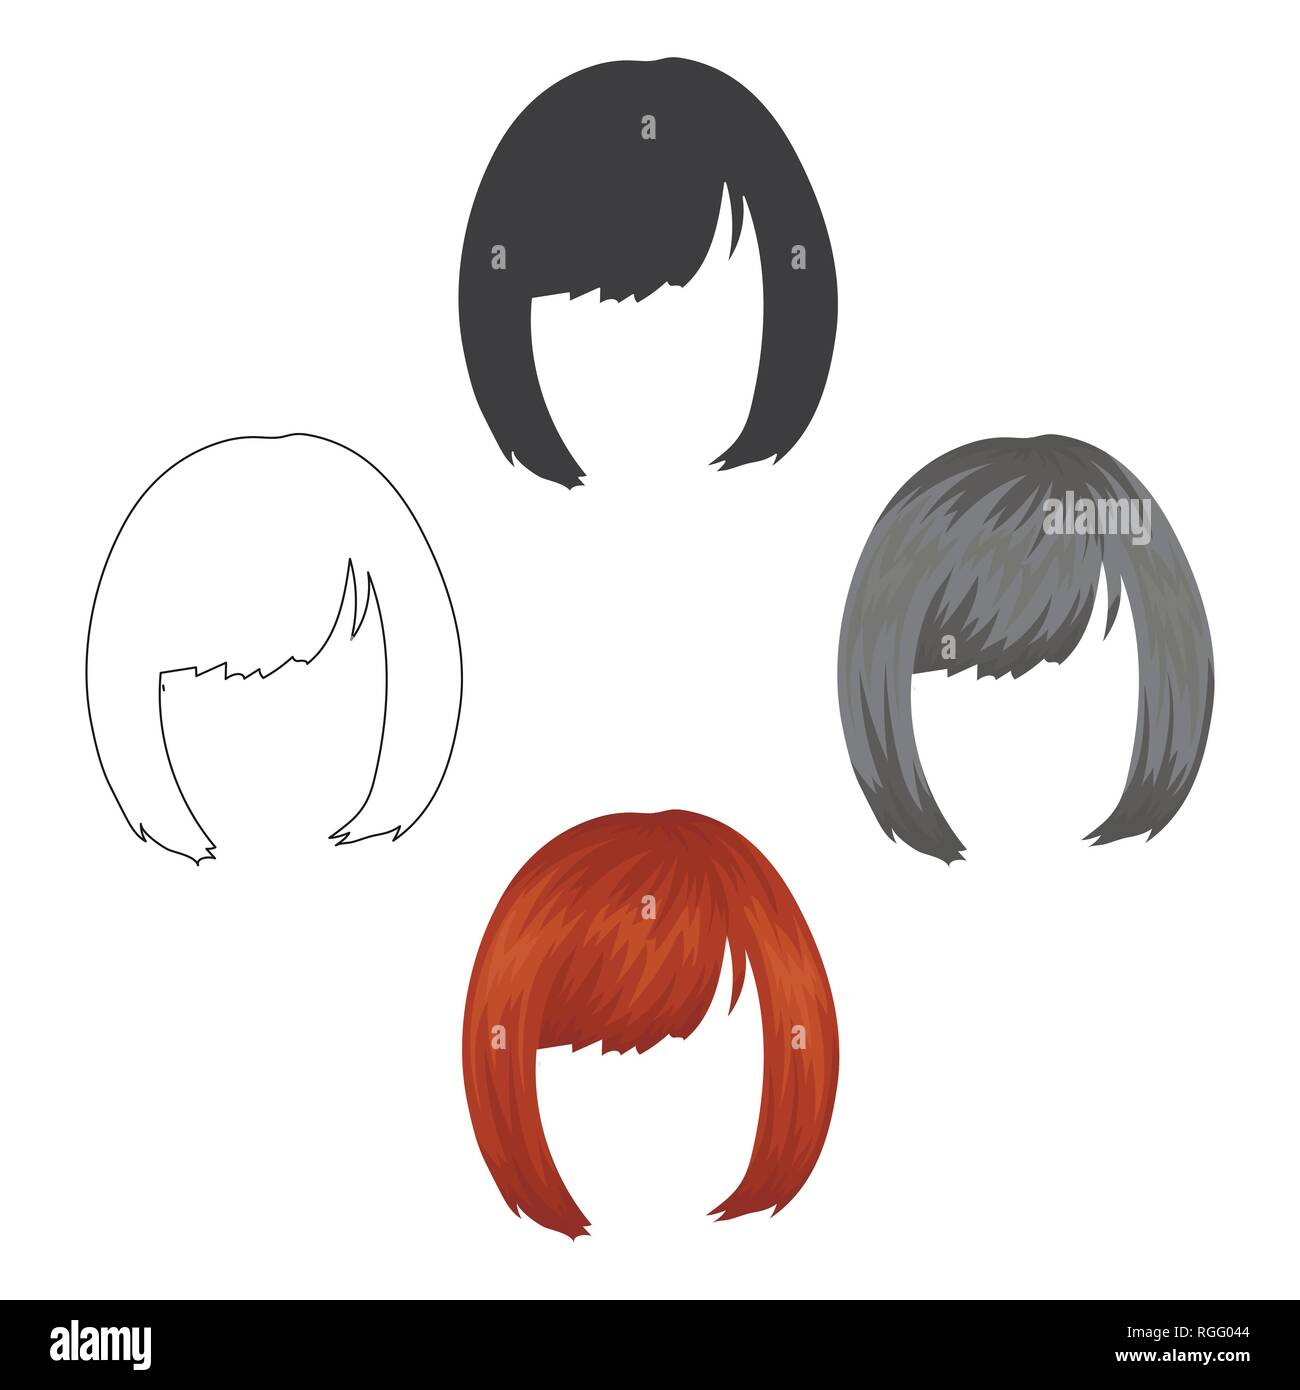 bangs ,beauty,blond,braided,cartoon,different,fashion,female,hair,haircut,hairdresser,hairpin,hairstyle,icon,illustration,isolated,logo,long,loose,red,short,sign,spit,square,ssad,style,symbol,tail, type,vector,view,web, Vector Vectors Stock Vector Image ...